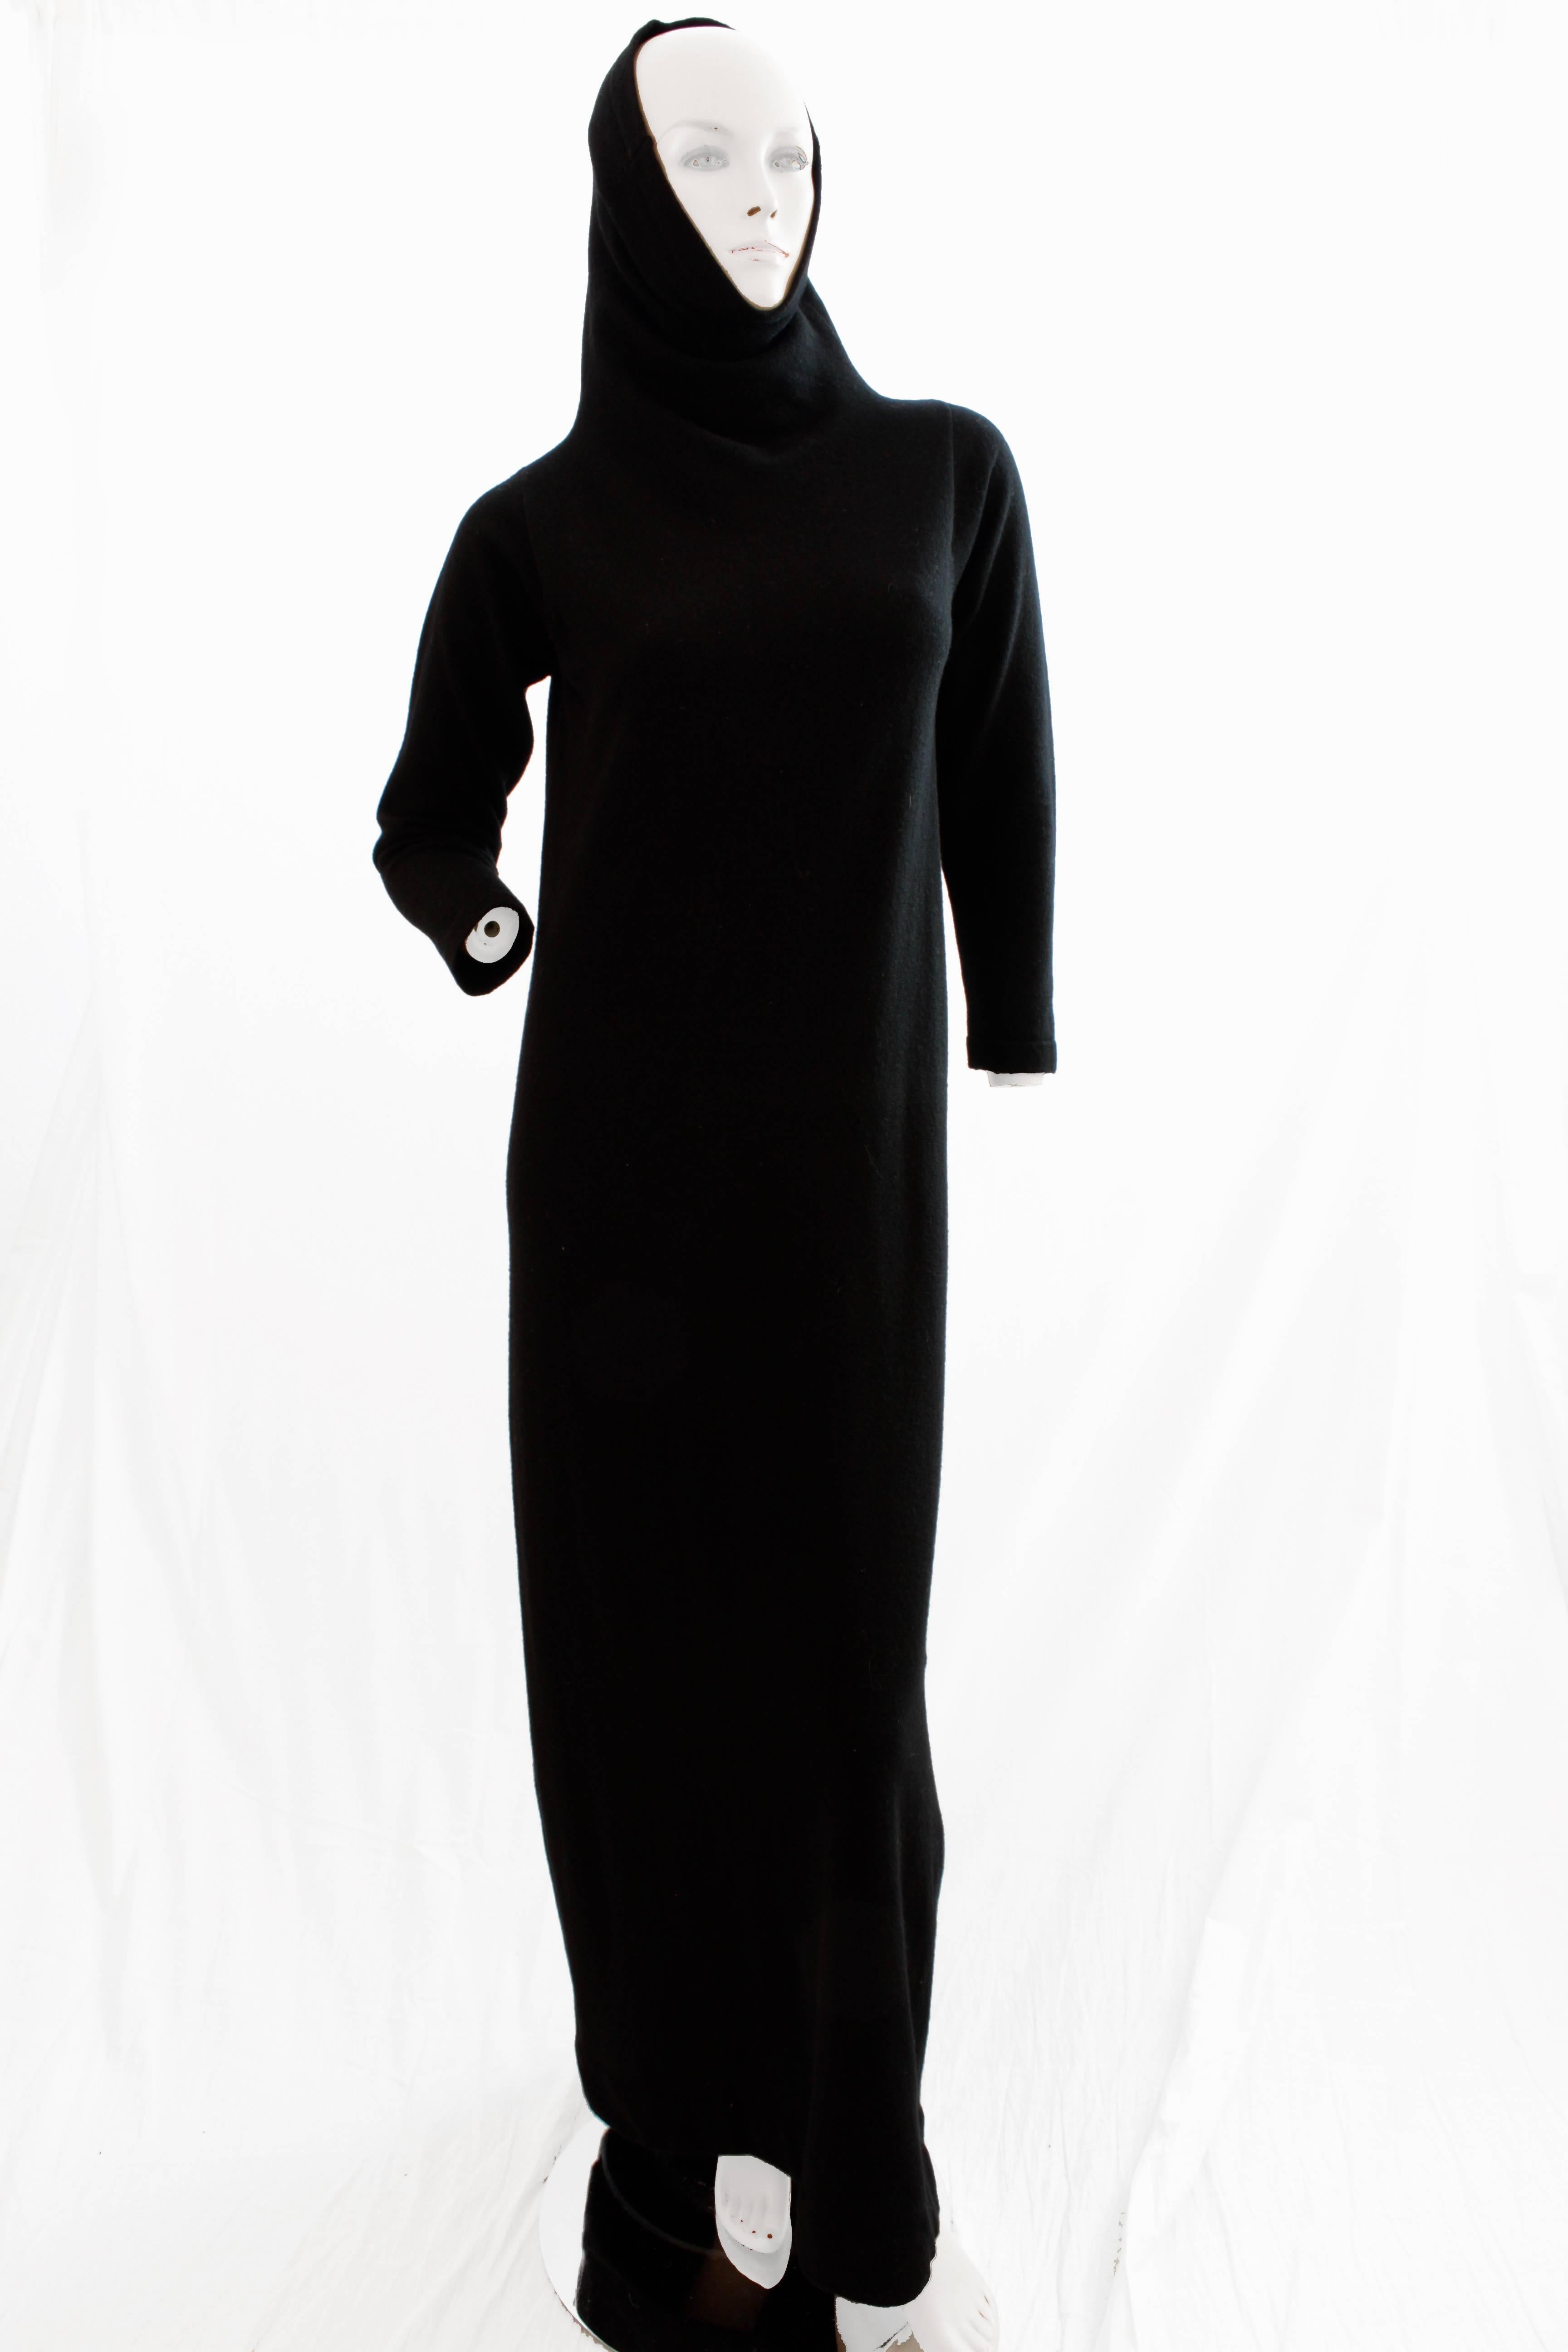 Here's a rare maxi dress from Bonnie Cashin - so hard to find nowadays! This gorgeous dress is made from a 100% lambswool knit in black and features Bonnie's signature 